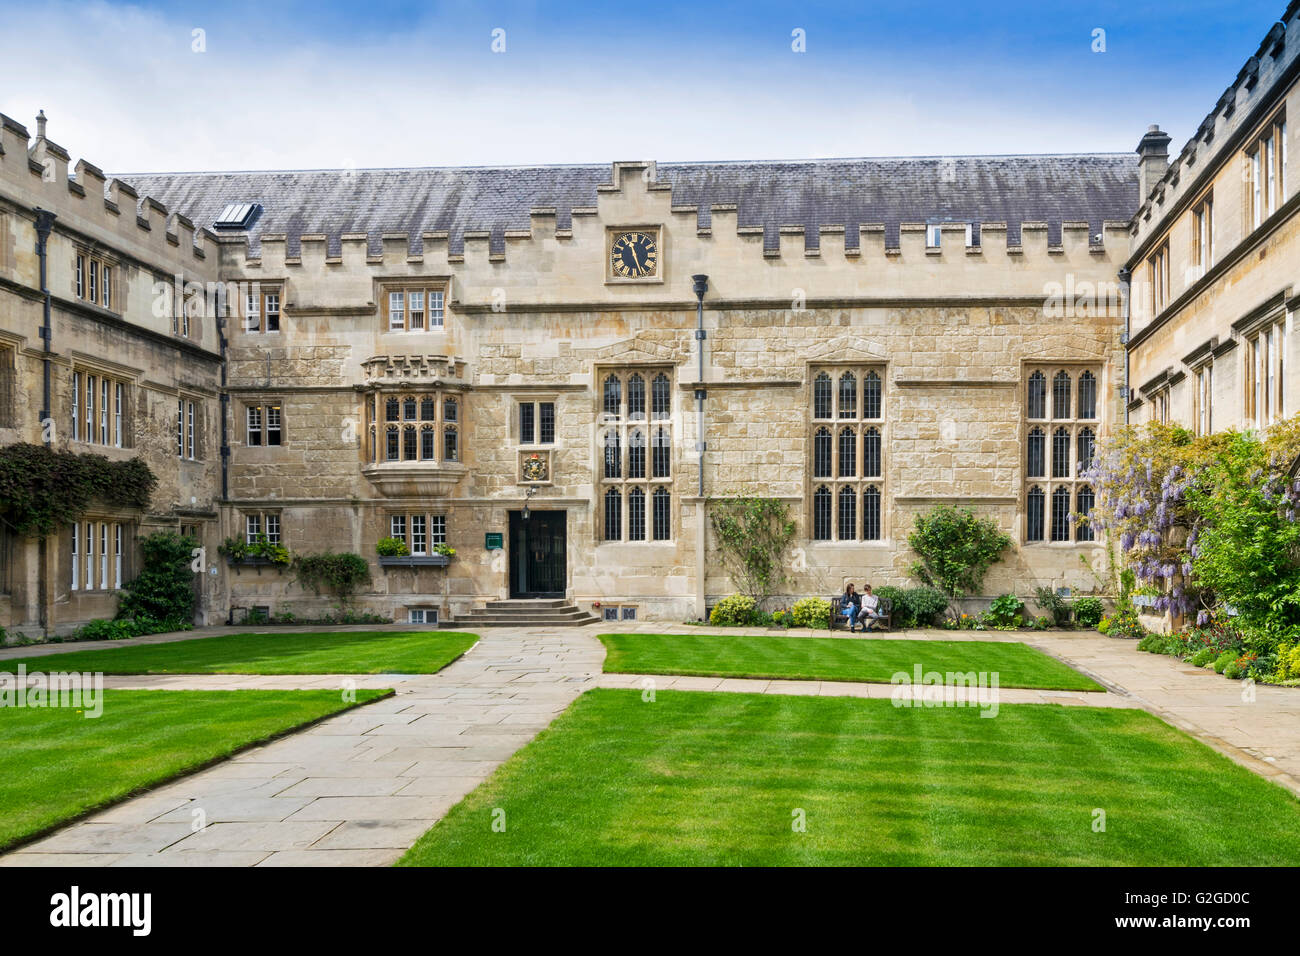 OXFORD CITY THE LAWNS OF JESUS COLLEGE Stock Photo